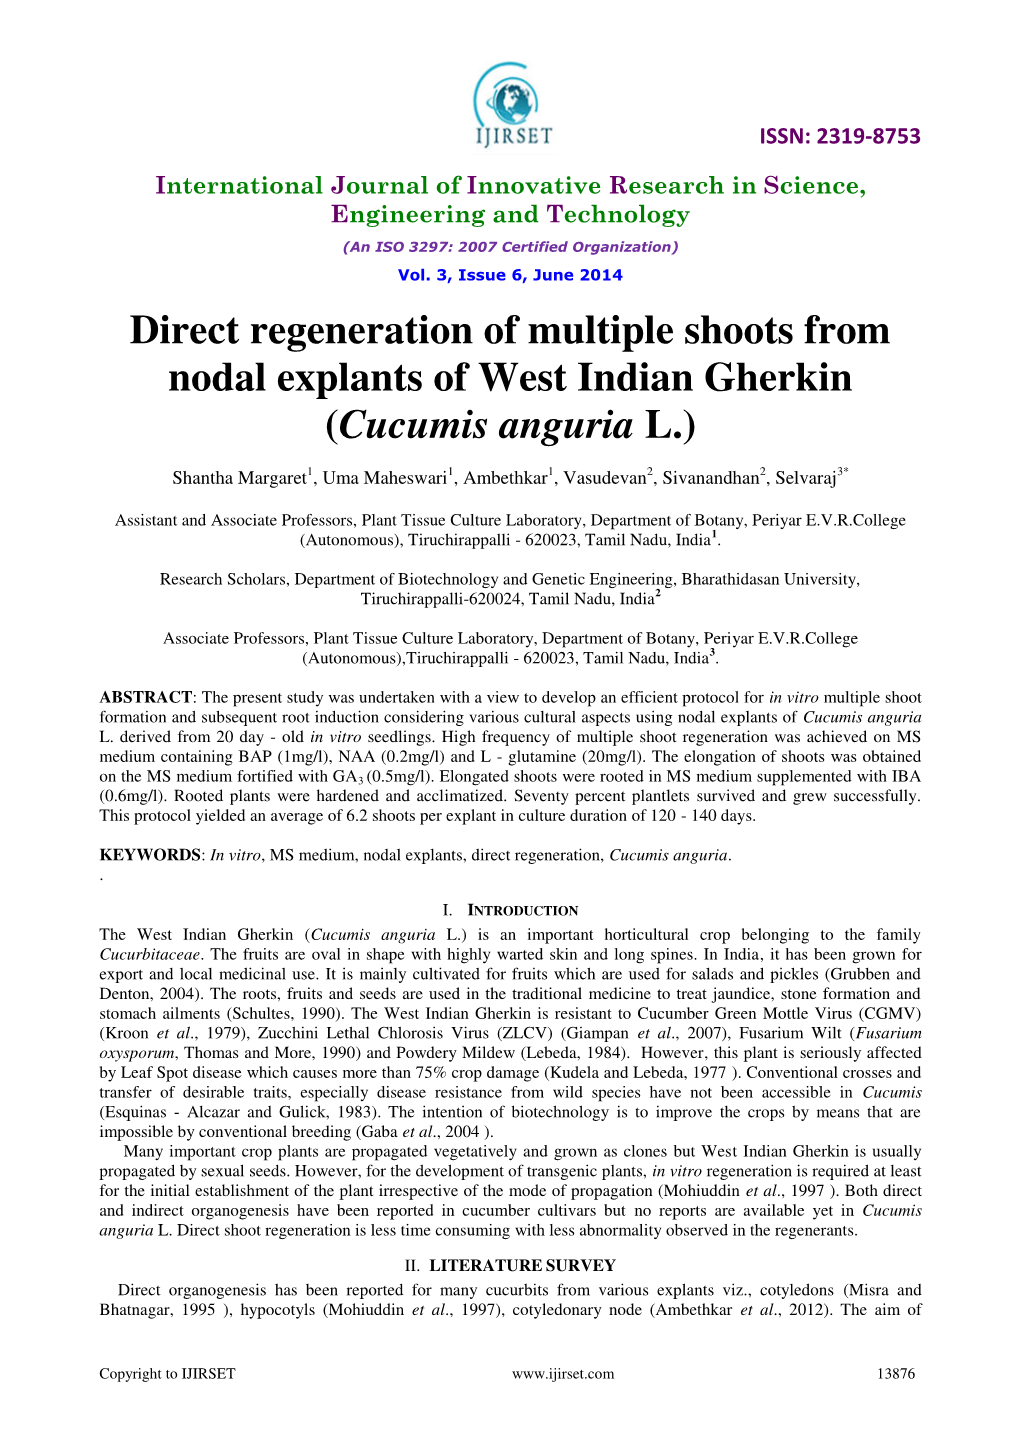 Direct Regeneration of Multiple Shoots from Nodal Explants of West Indian Gherkin (Cucumis Anguria L.)